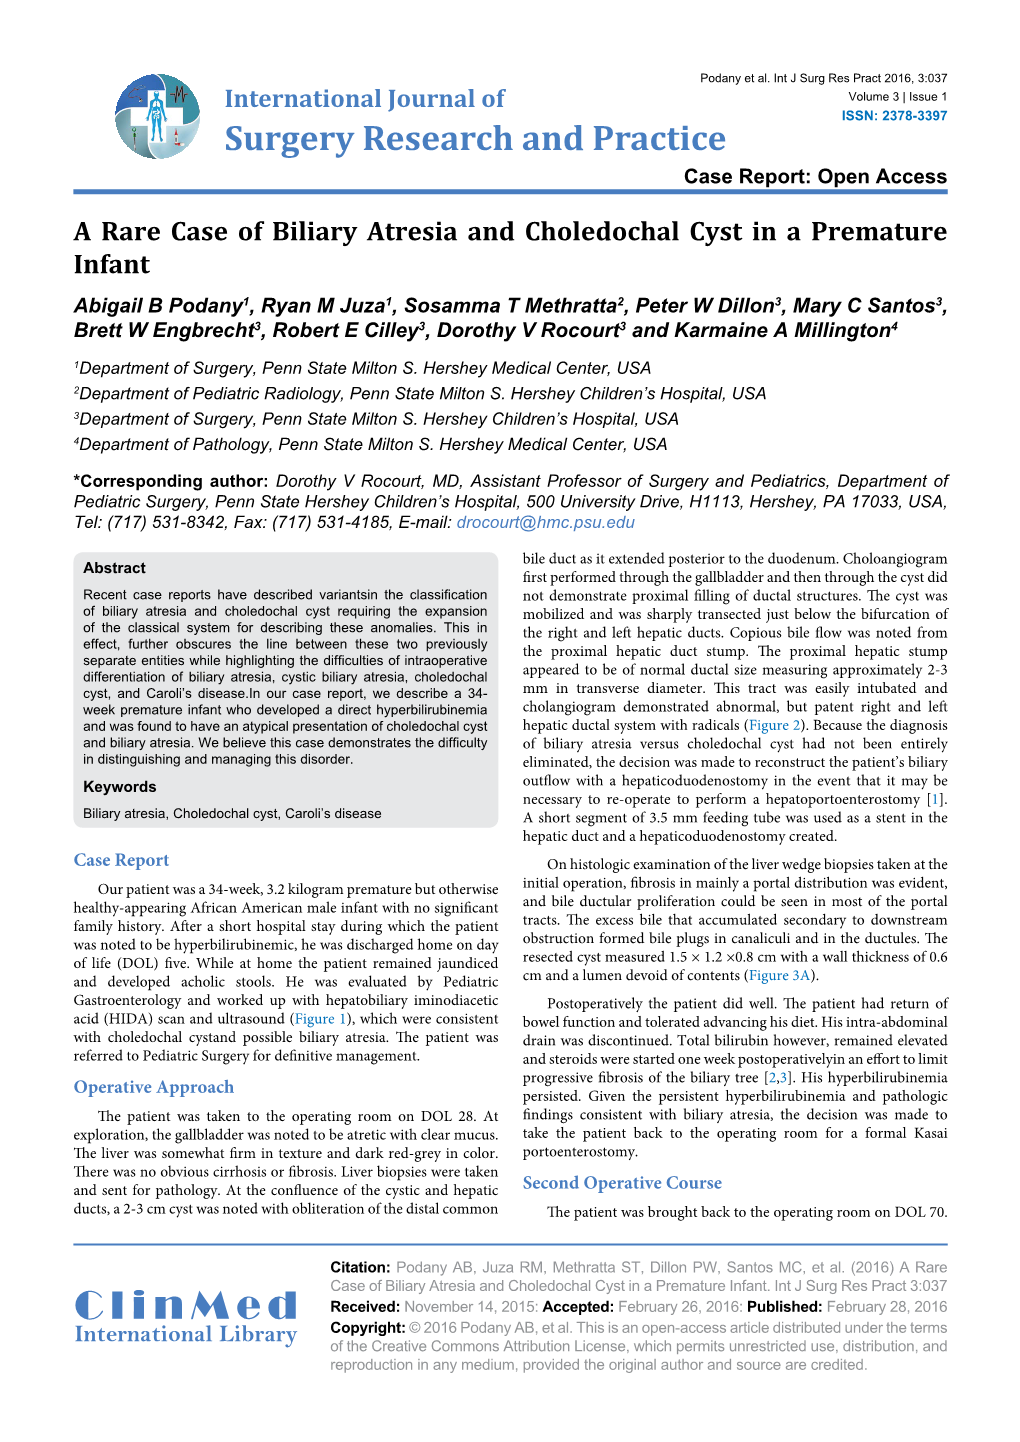 A Rare Case of Biliary Atresia and Choledochal Cyst in a Premature